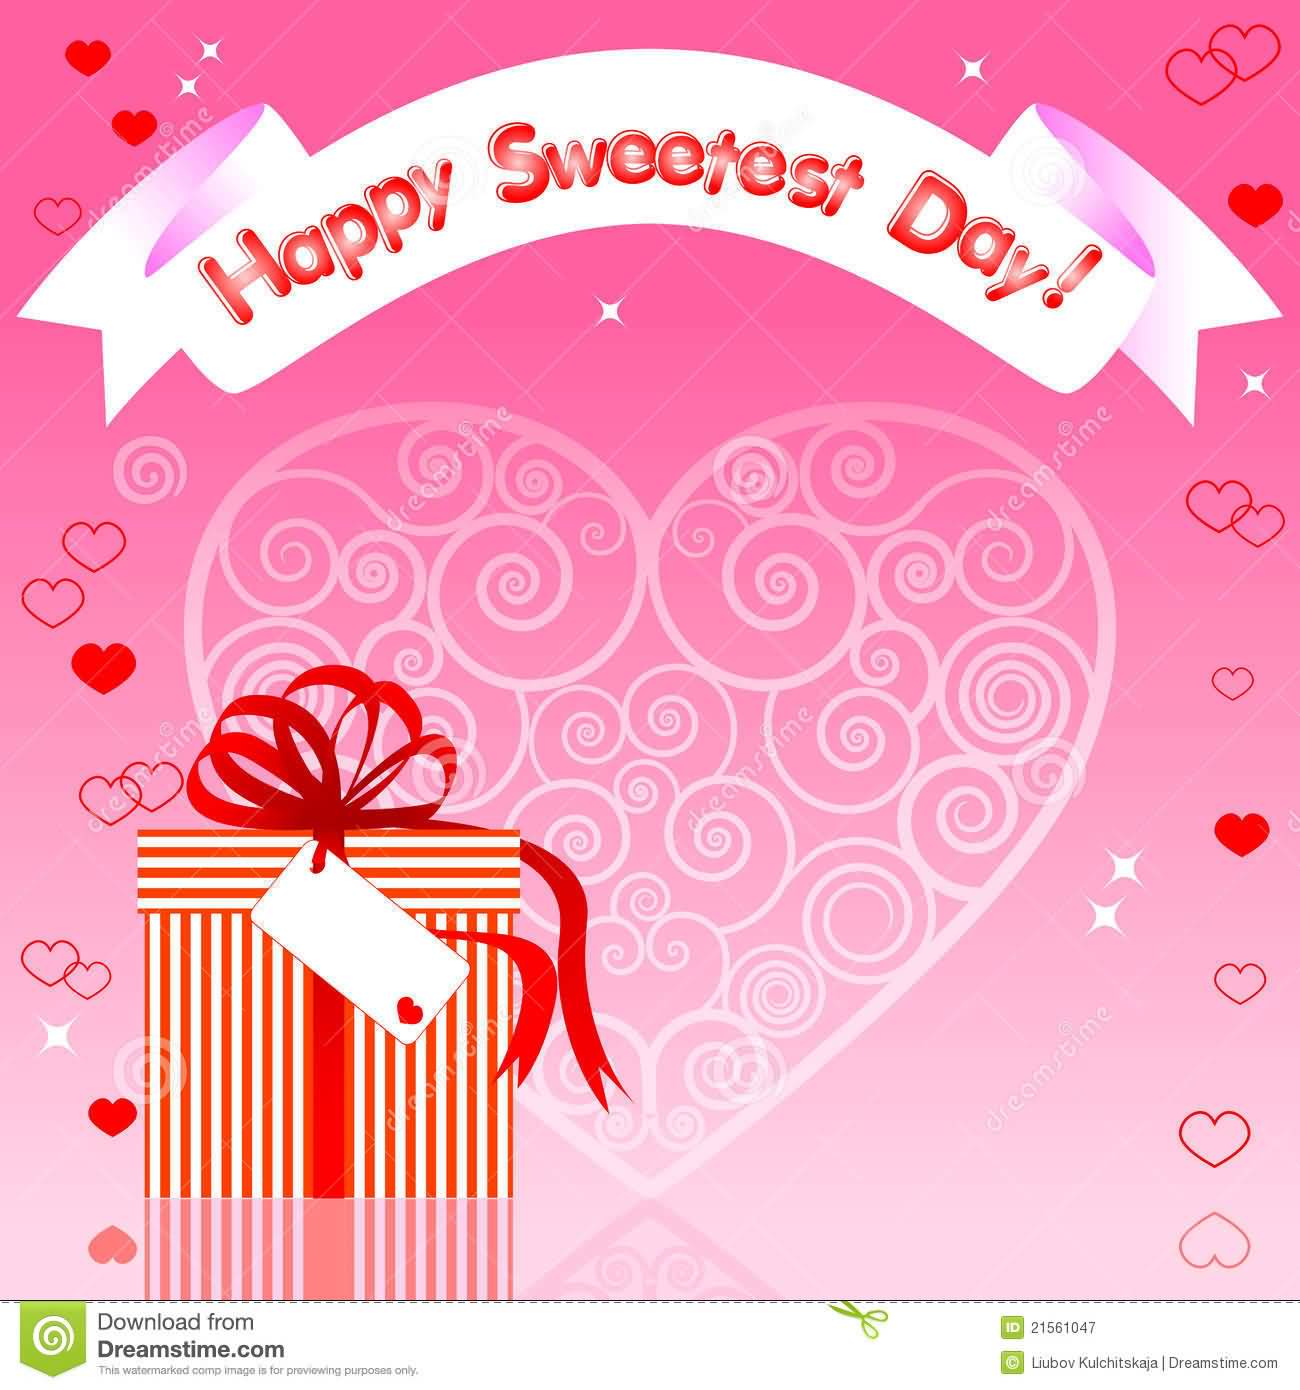 Happy Sweetest Day Gift Box Greeting Card